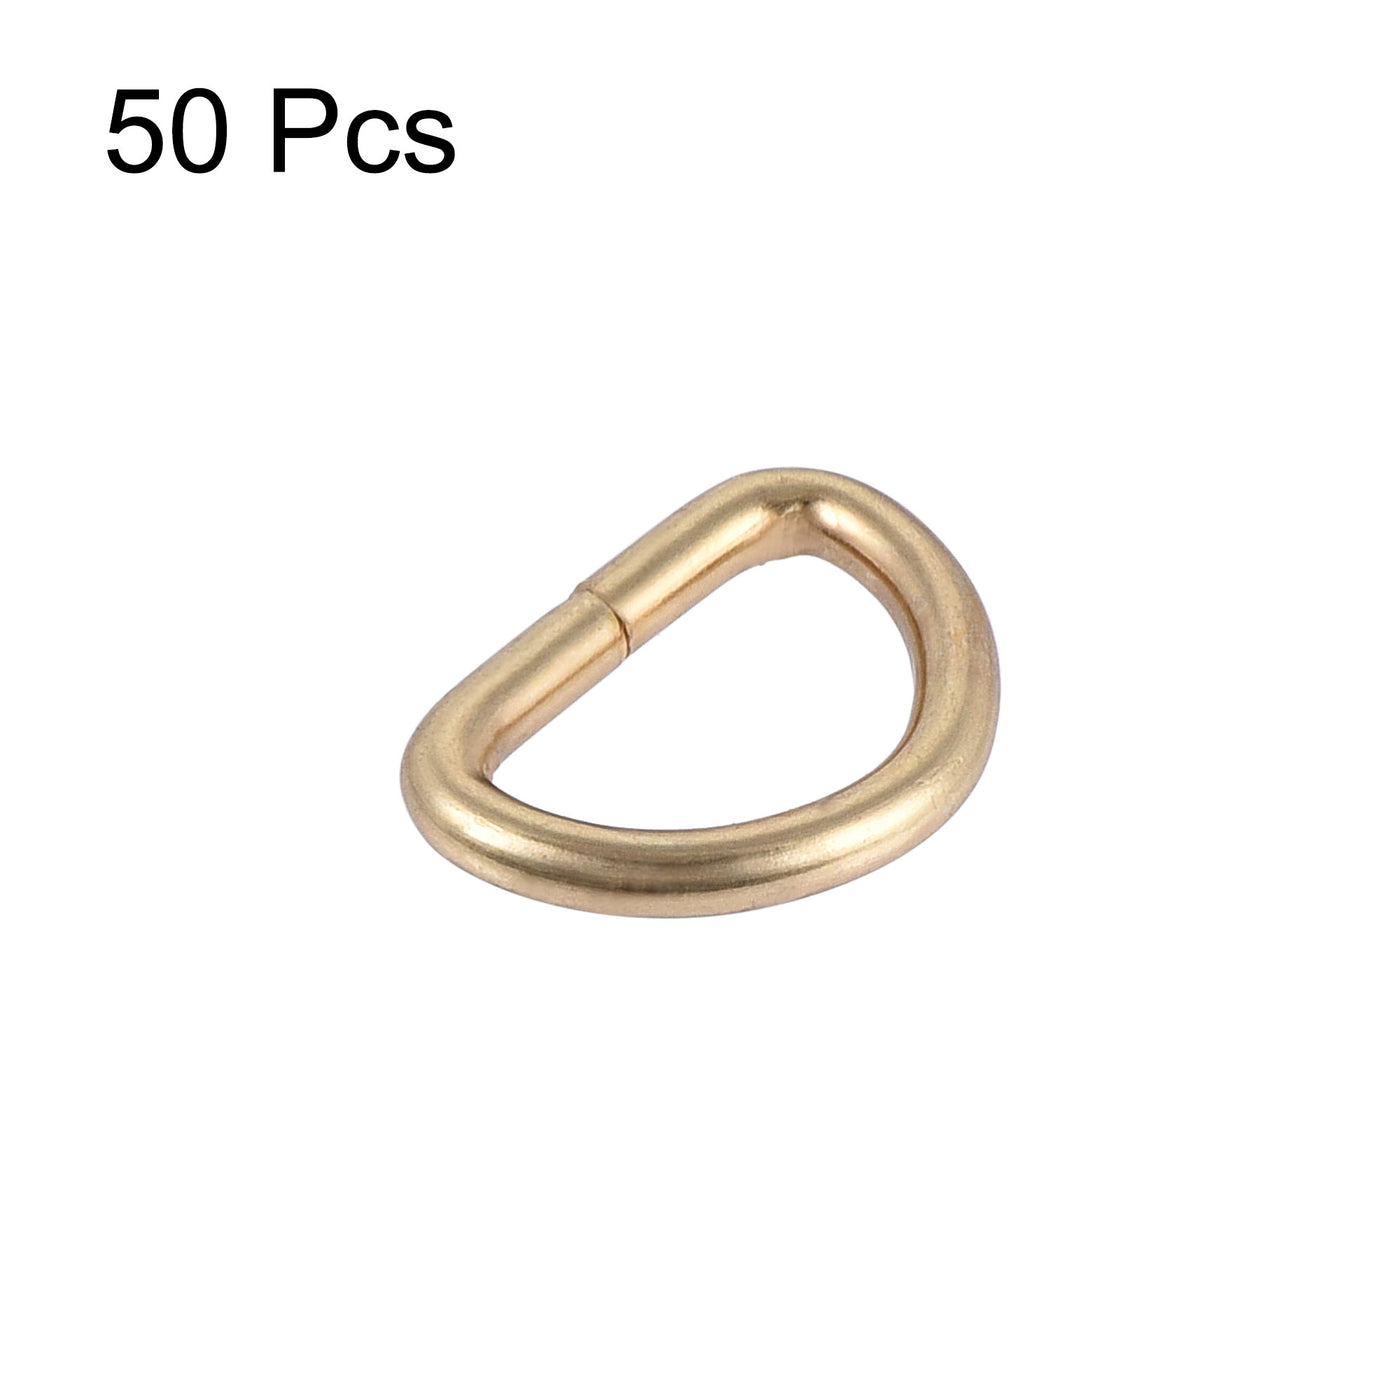 uxcell Uxcell Metal D Ring 0.39"(10mm) D-Rings Buckle for Hardware Bags Belts Craft DIY Accessories Gold Tone 50pcs